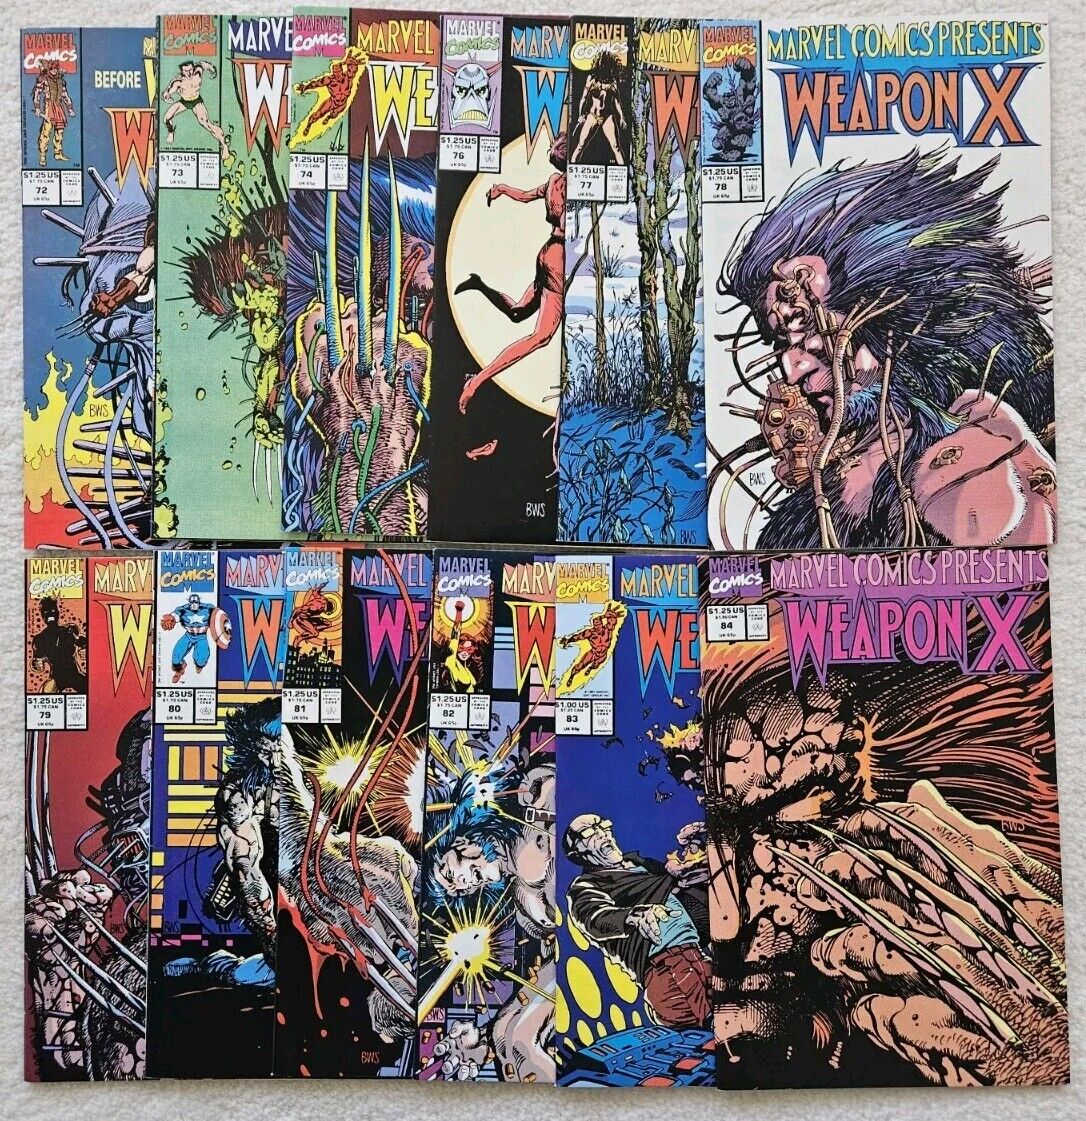 Marvel Comics Presents #72-84 (Missing #75 13 issue lot) NM Weapon X